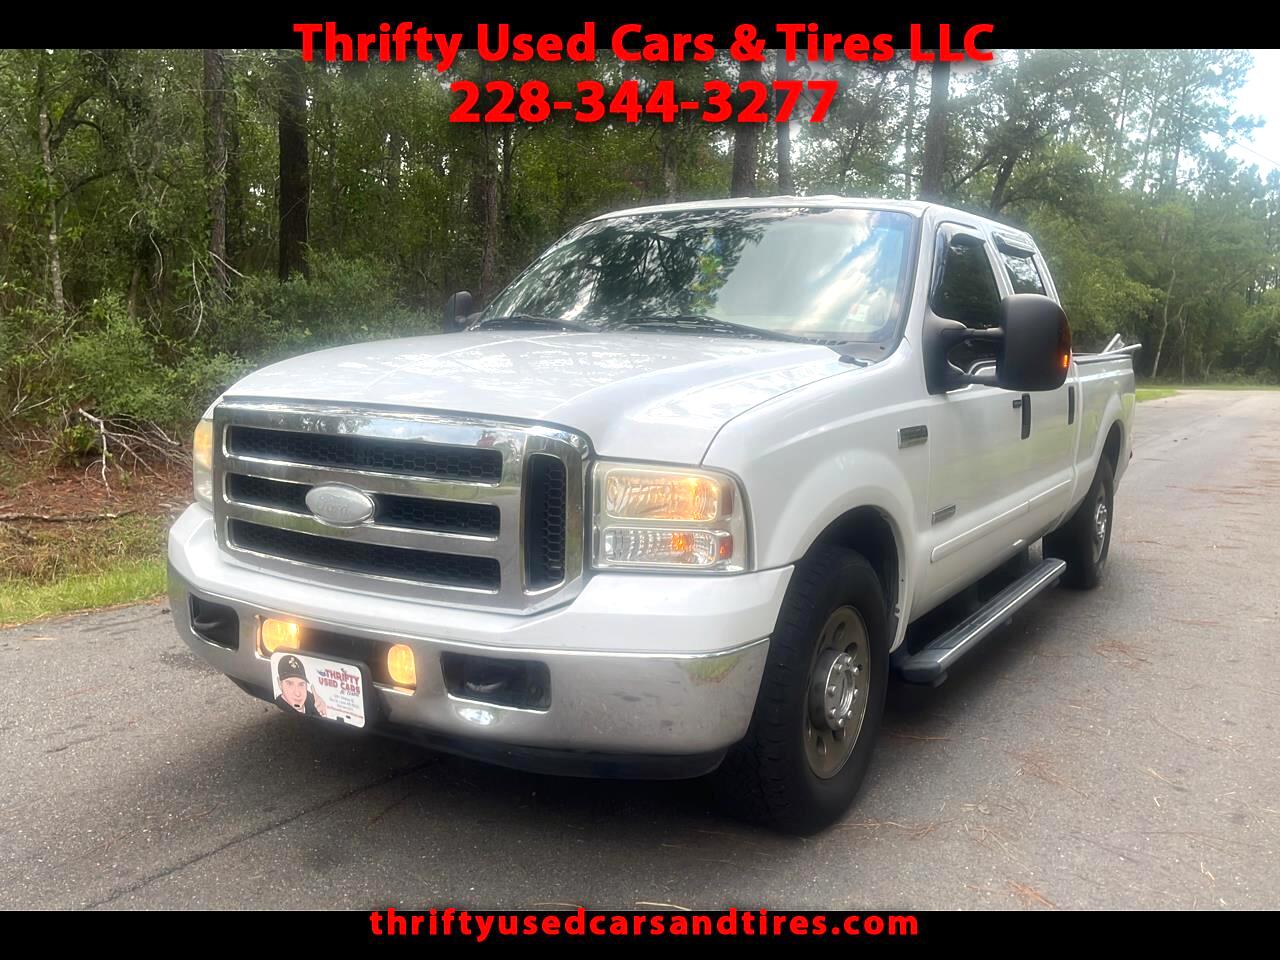 Ford F-250 SD XLT Crew Cab Long Bed 2WD 2006